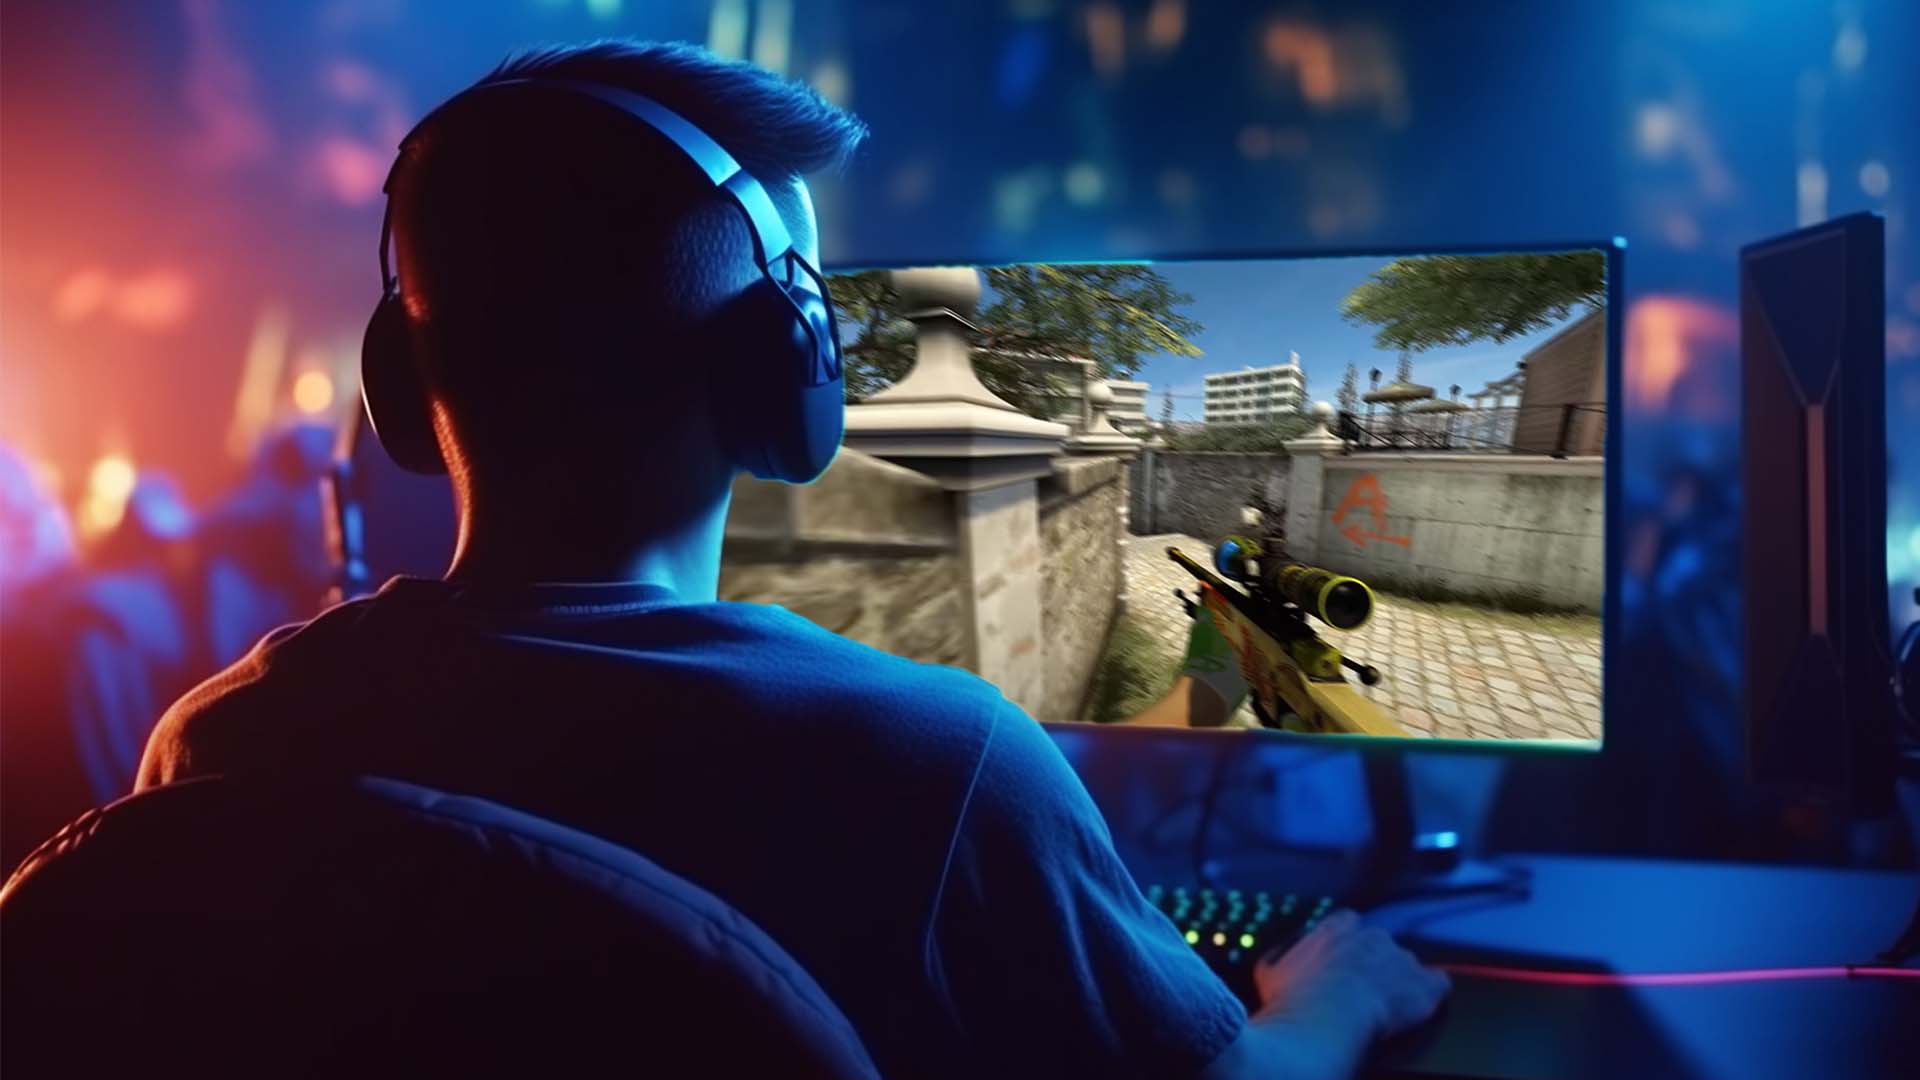 Gamer playing CSGO on PC, fast reaction time and accurate eye-hand coordination